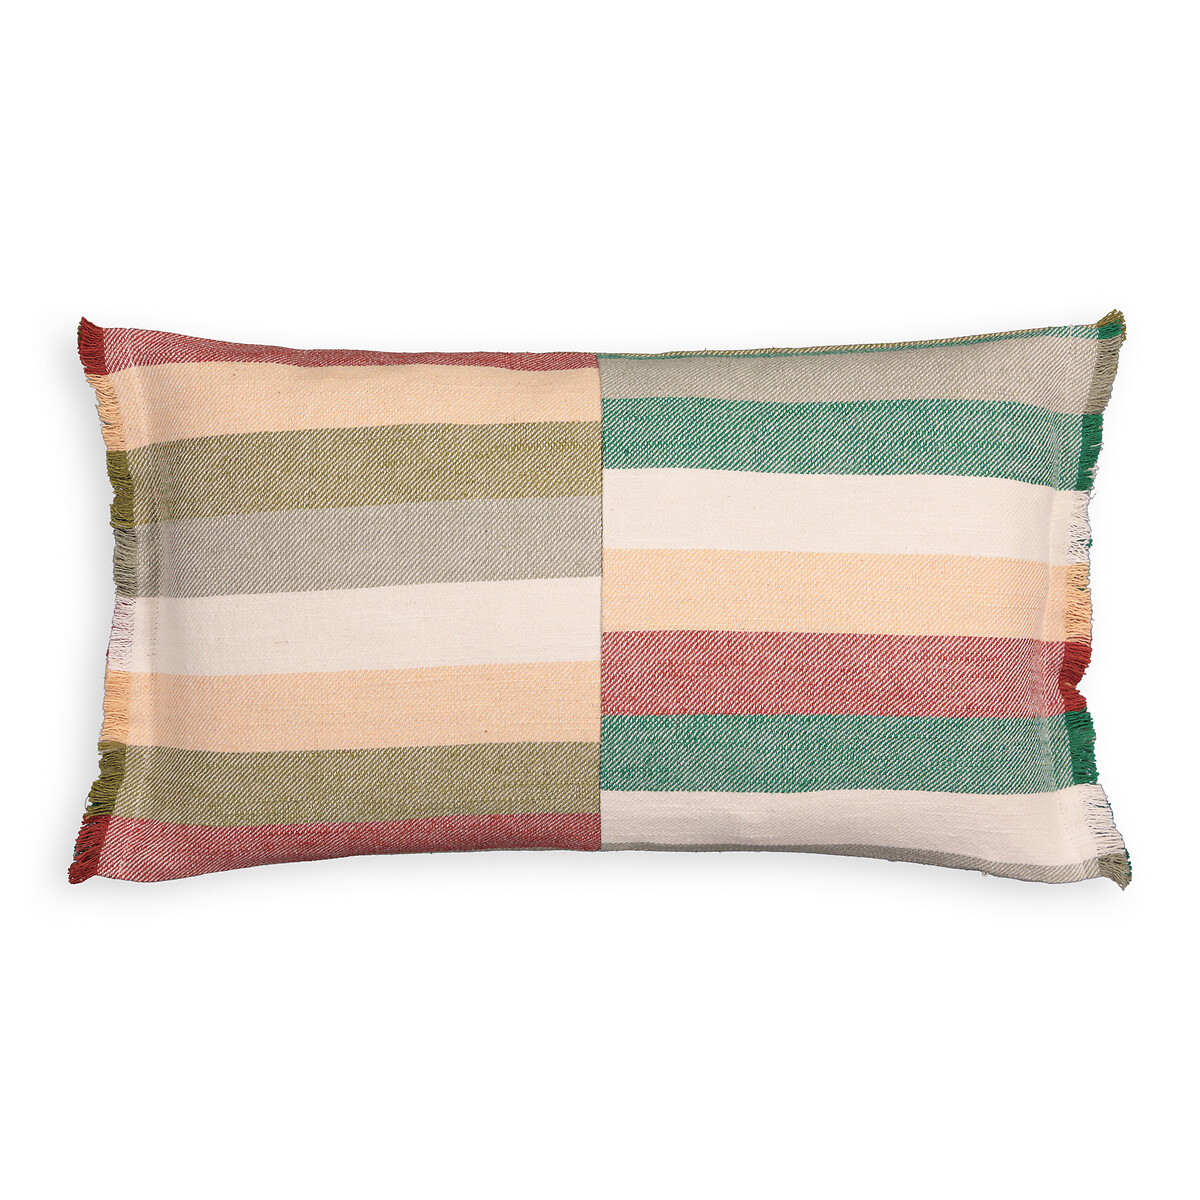 Antana Striped Fringed Cotton and Linen Blend Rectangular Cushion Cover